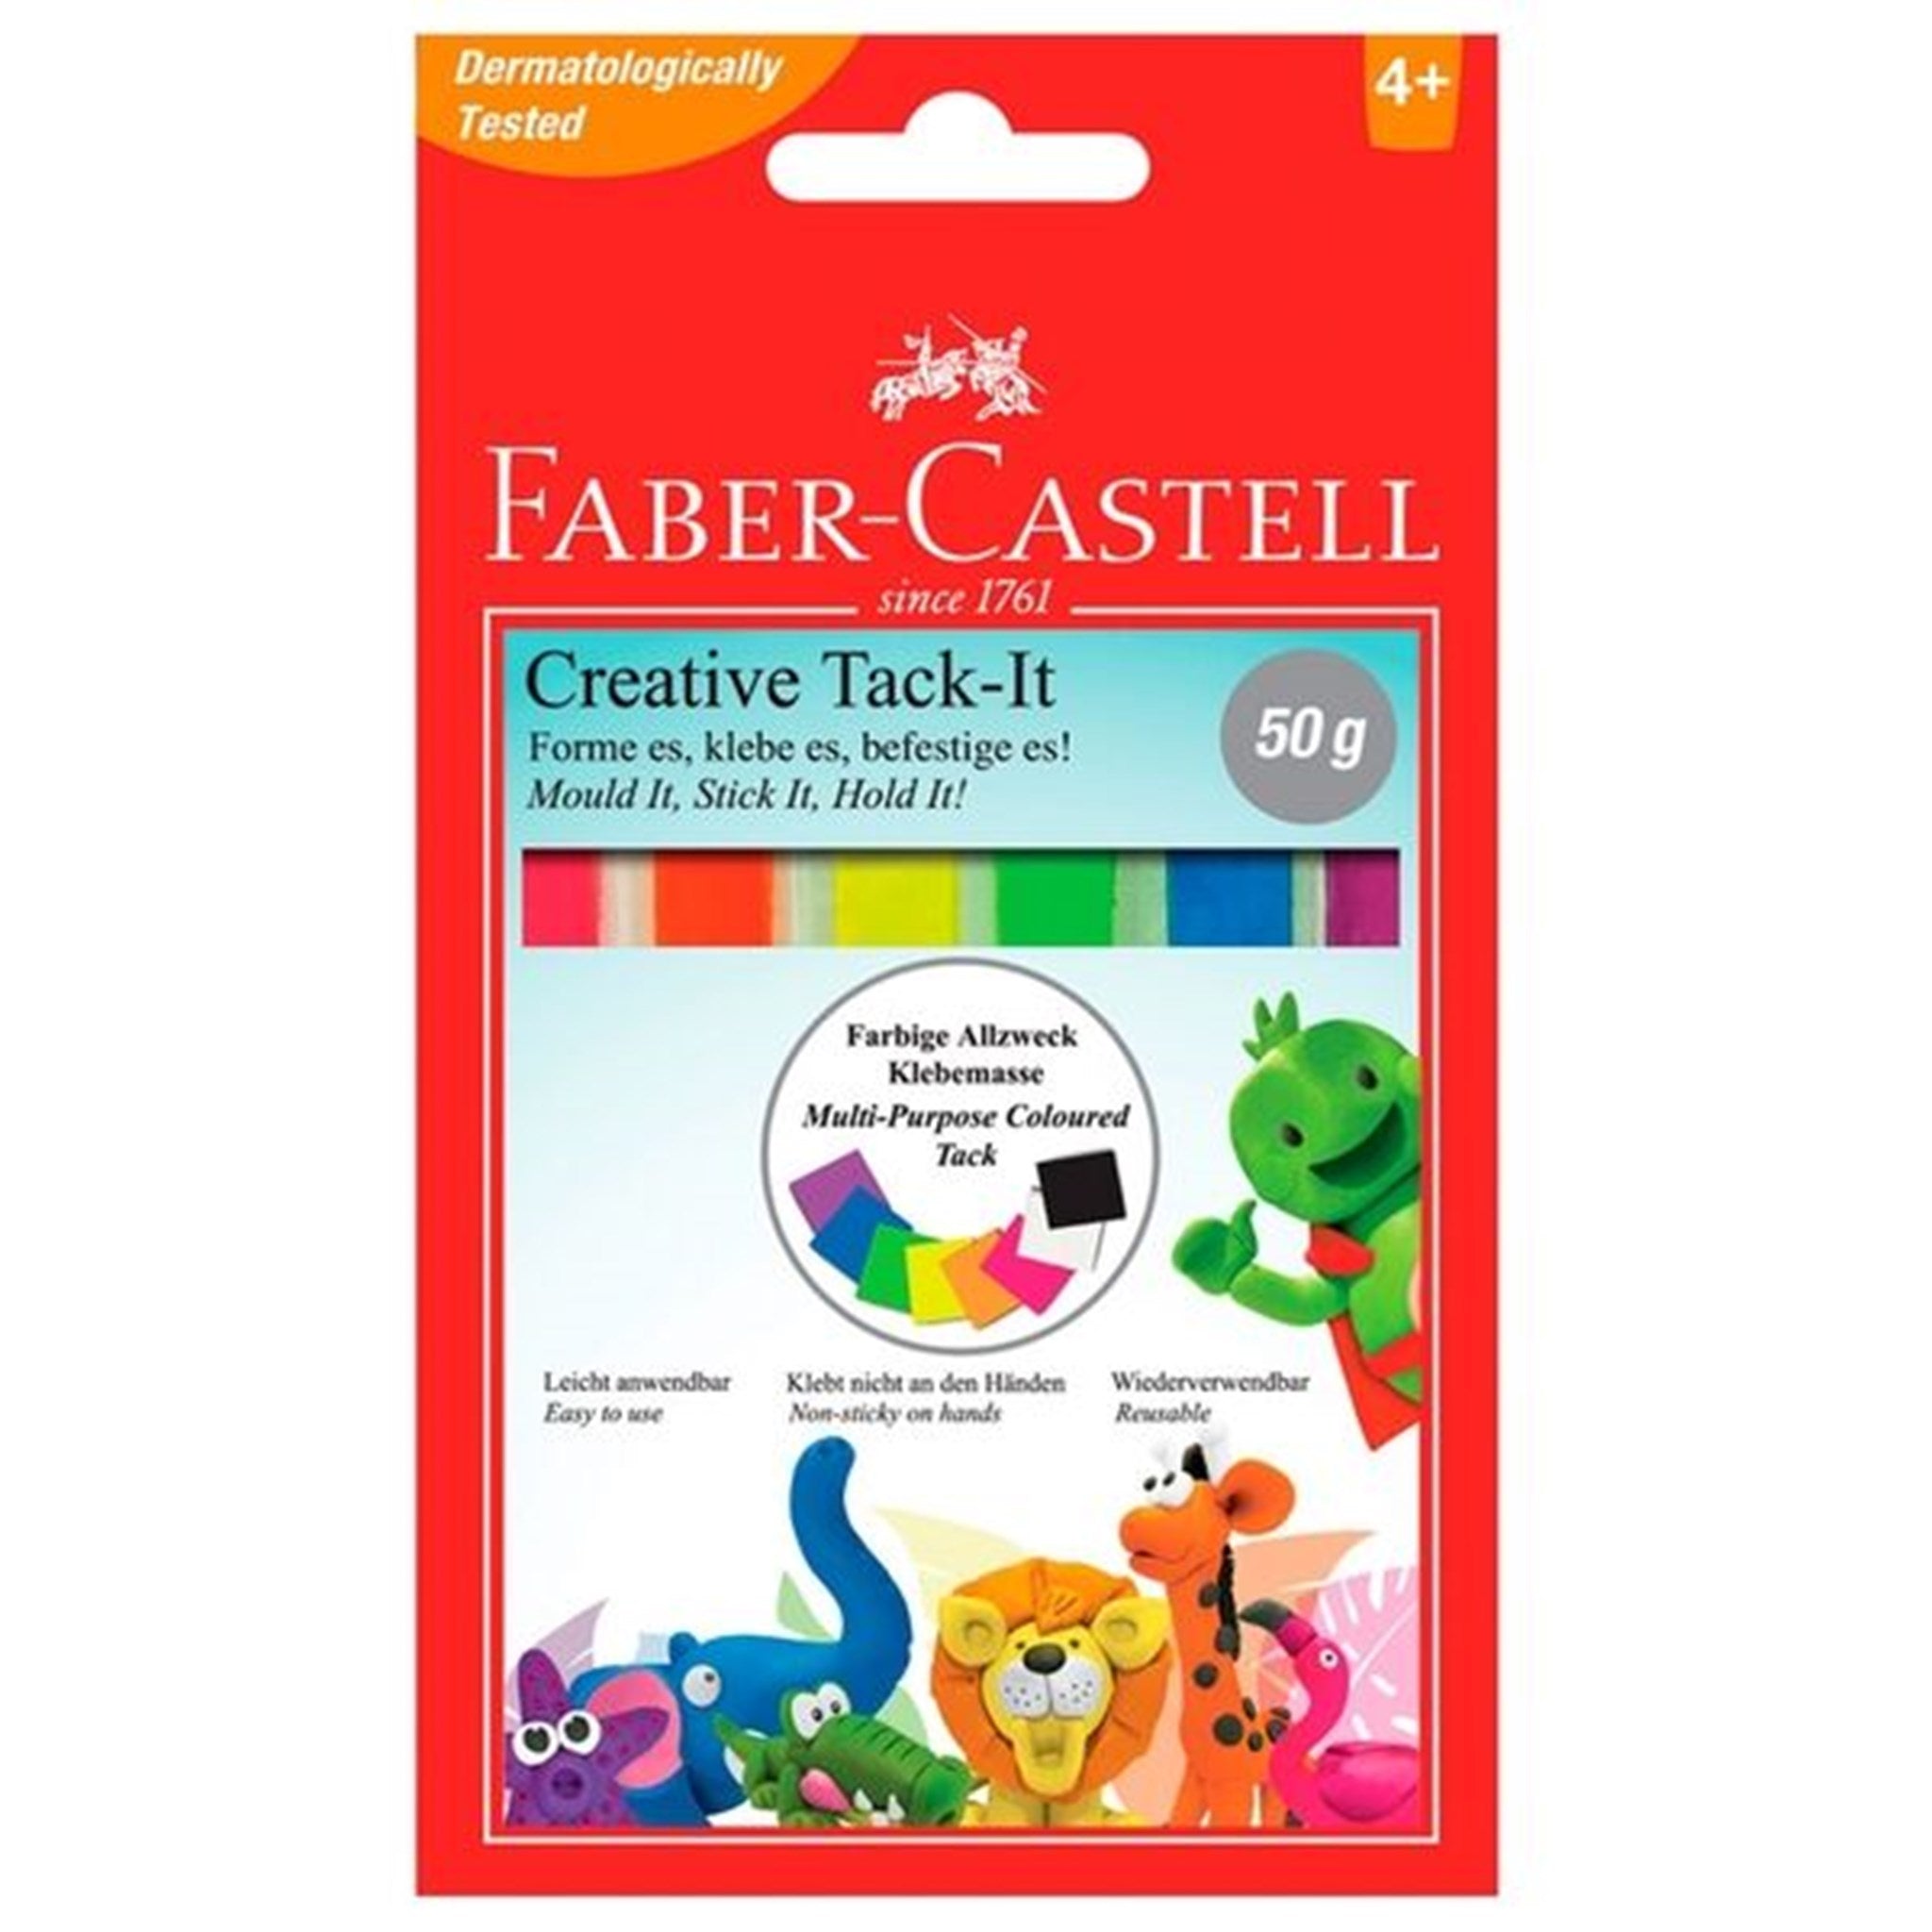 Faber Castell Kreative Tack-It